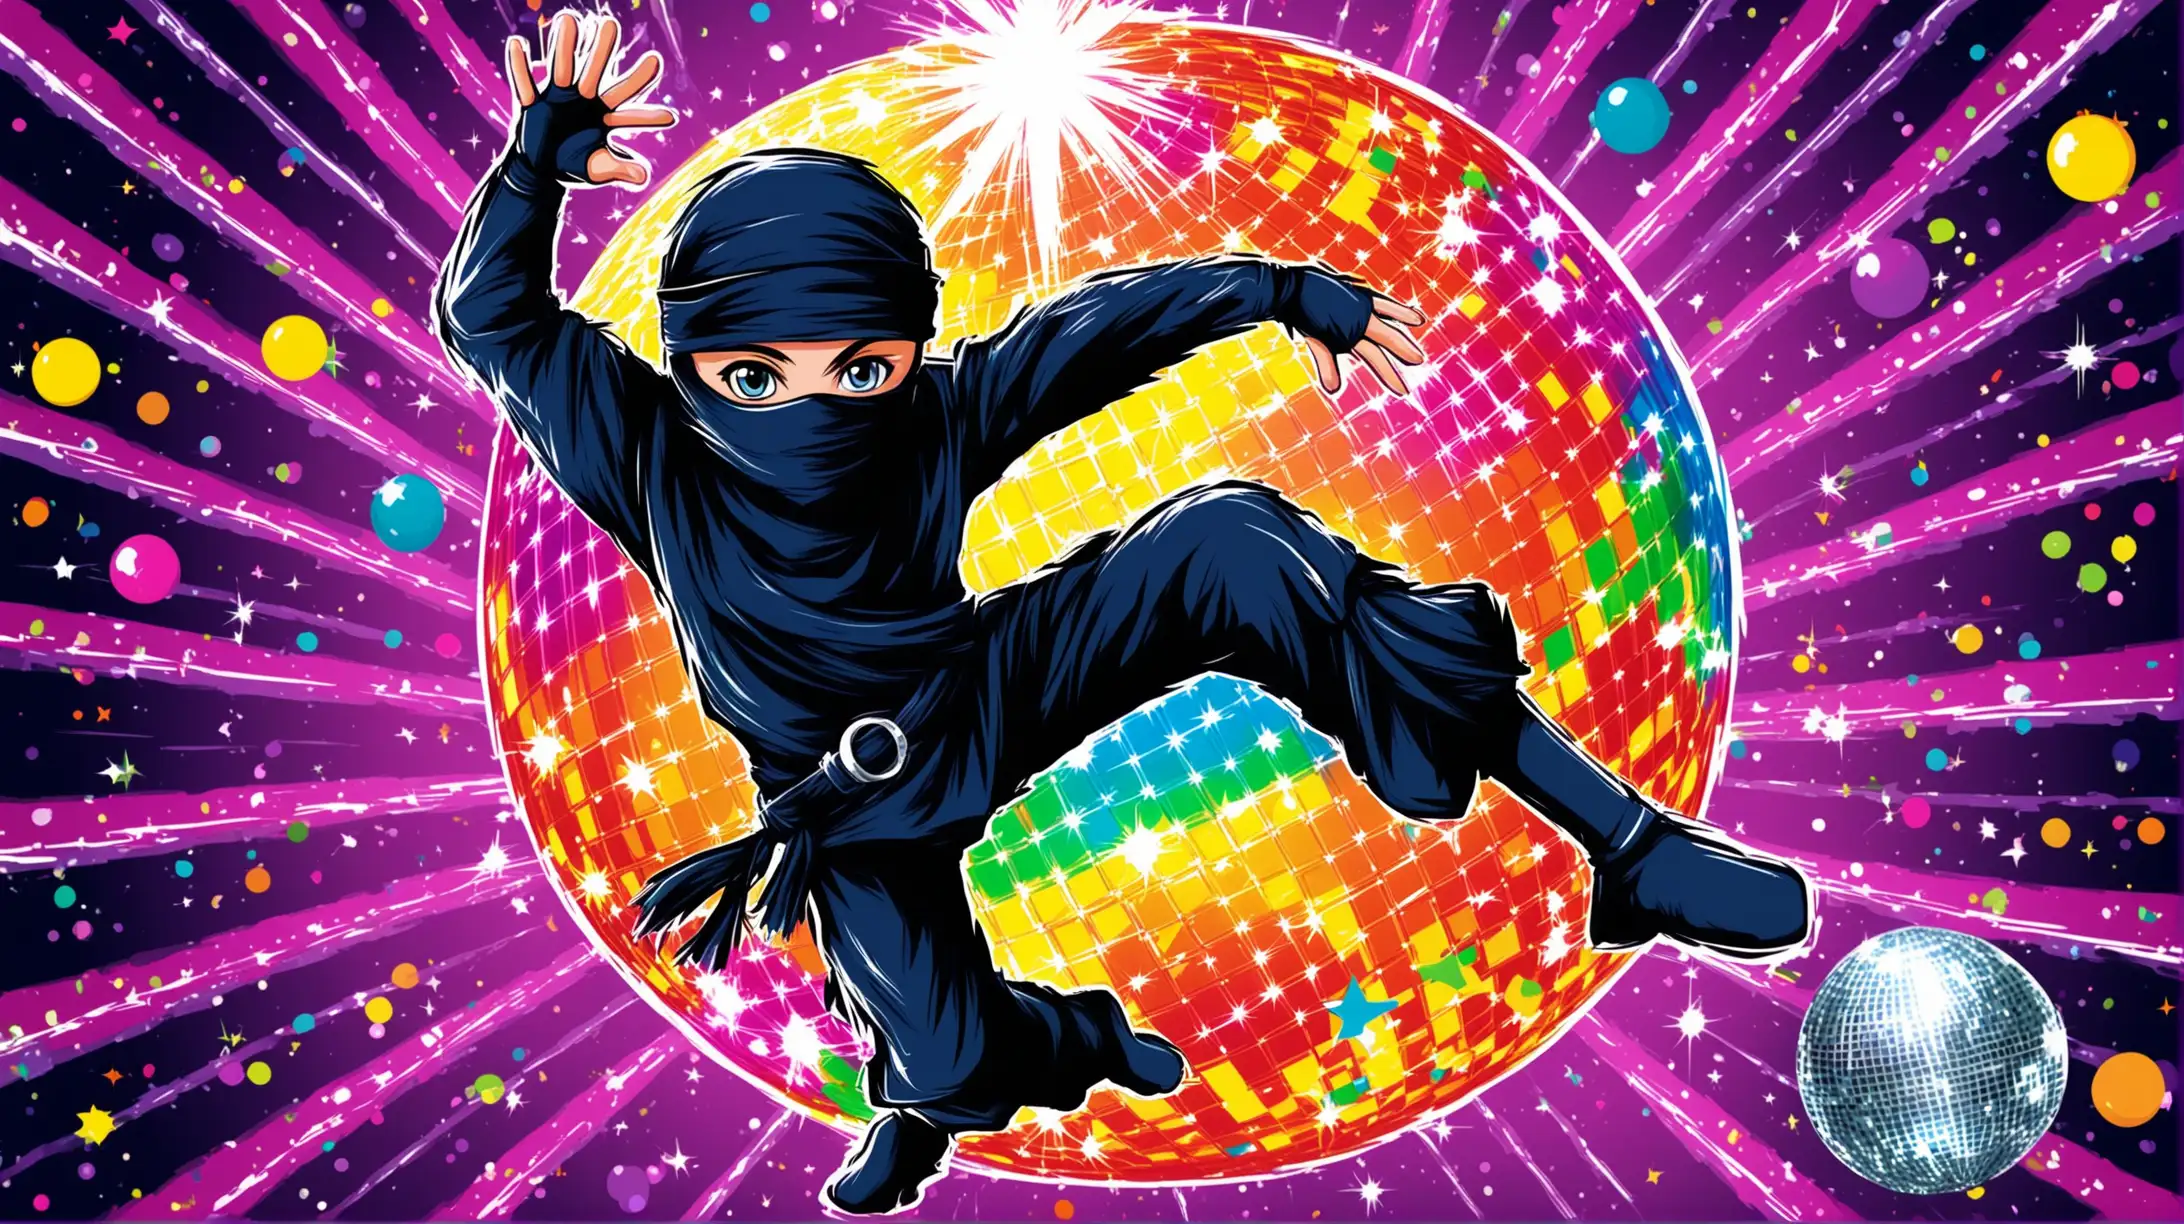 fun abstract poster for a ninja themed kids disco event feating a disco ball